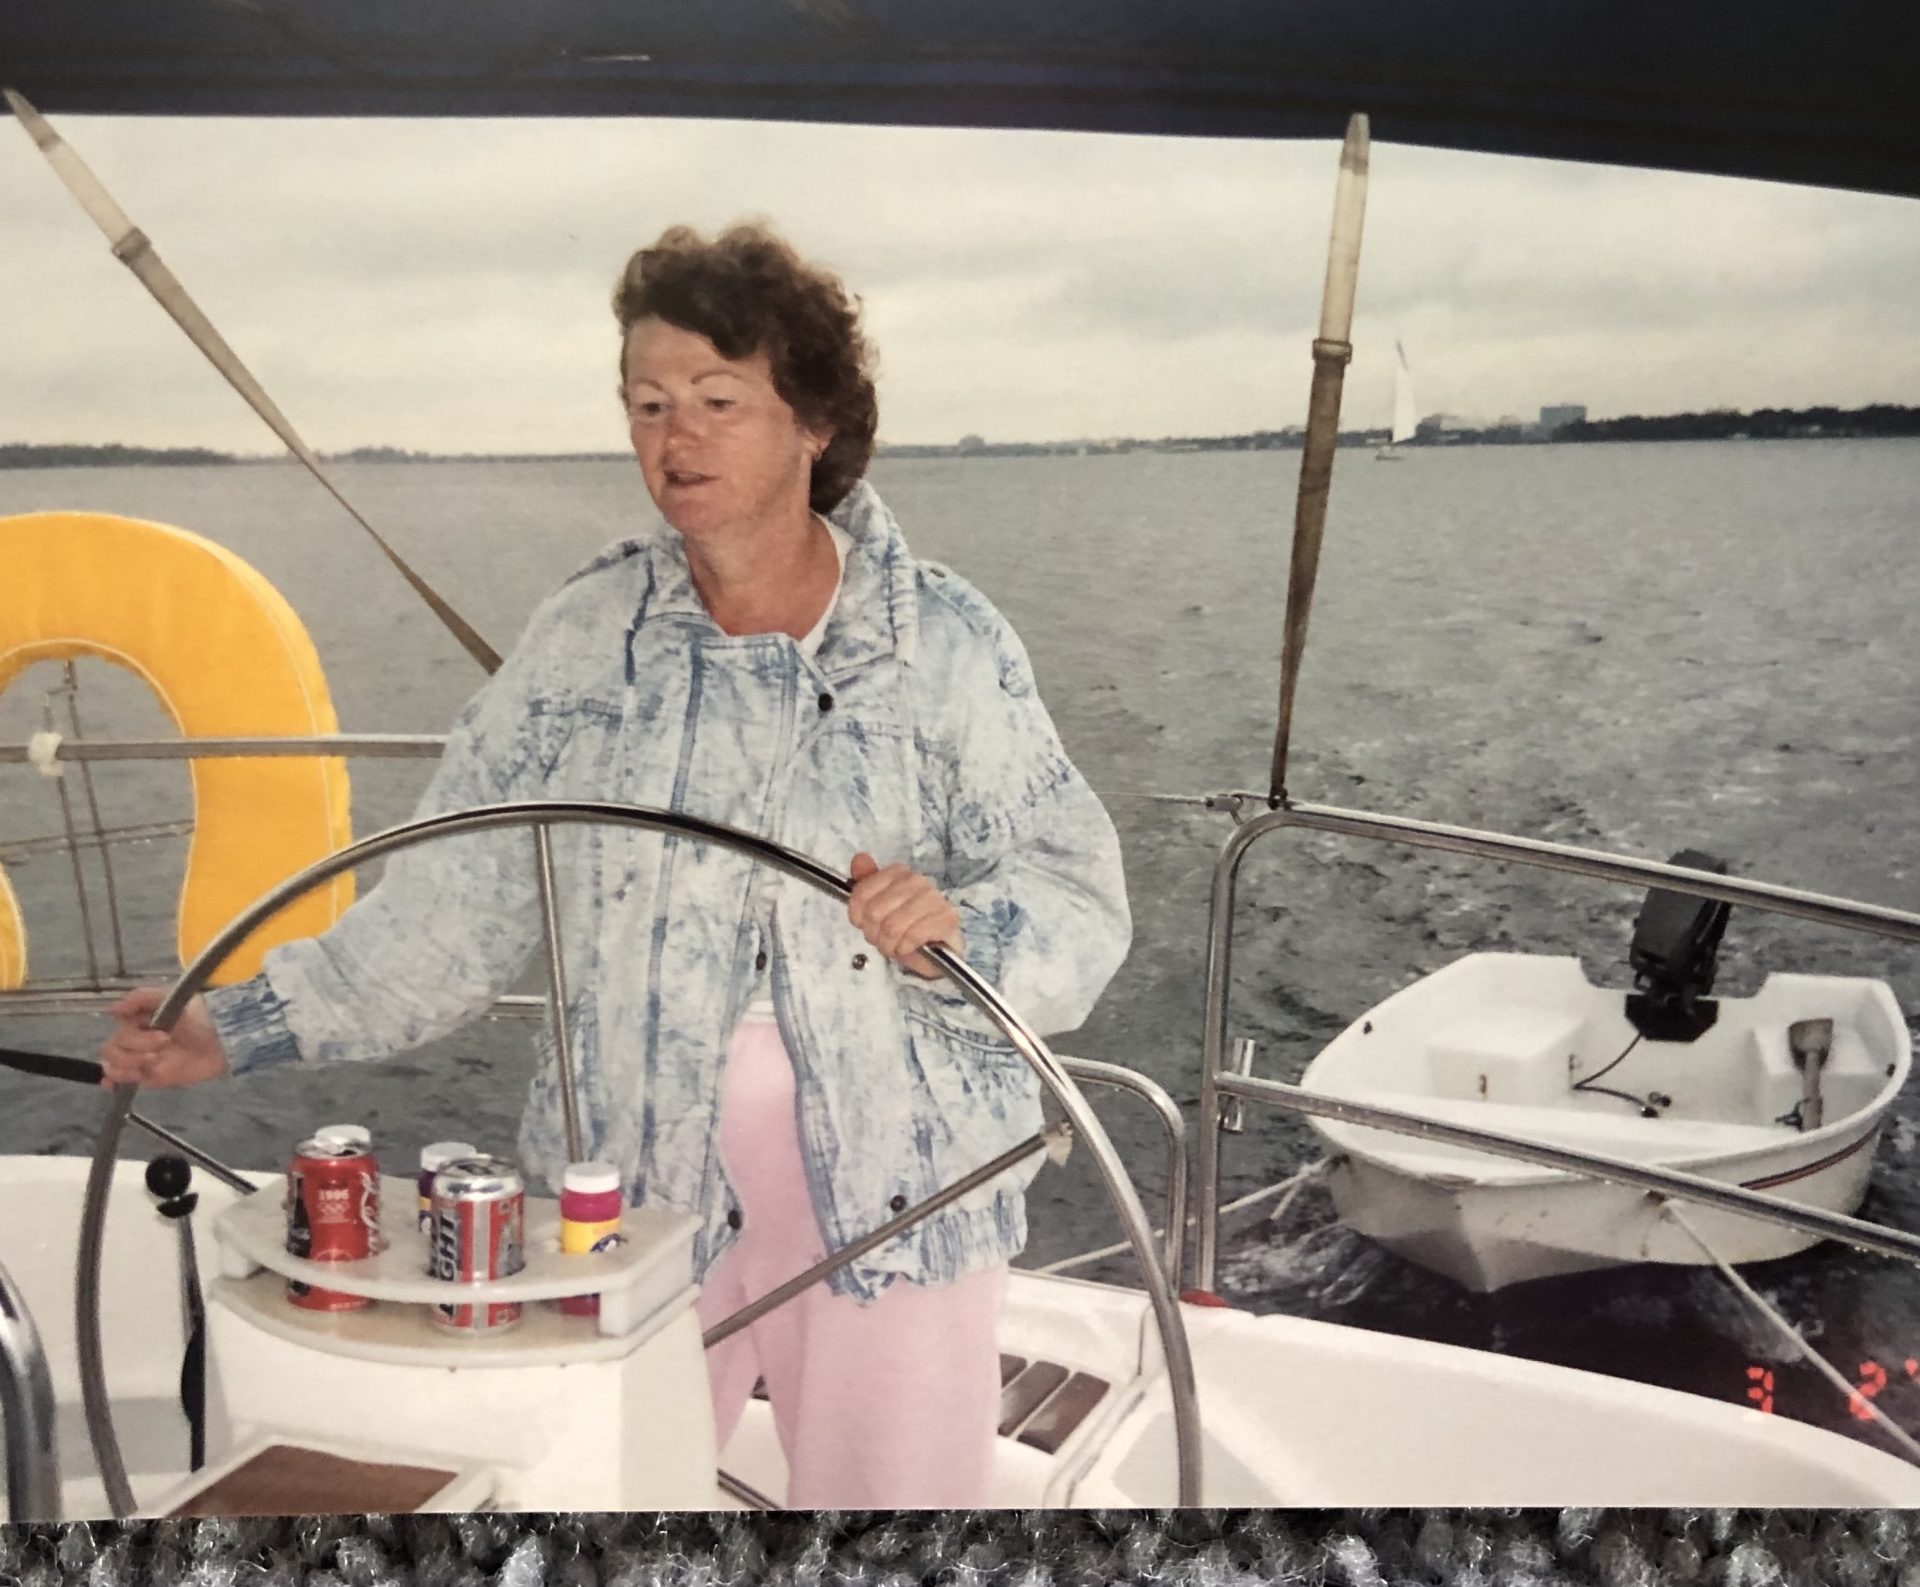 Sailing days ❤️<br />
Thanks for the pics Ed